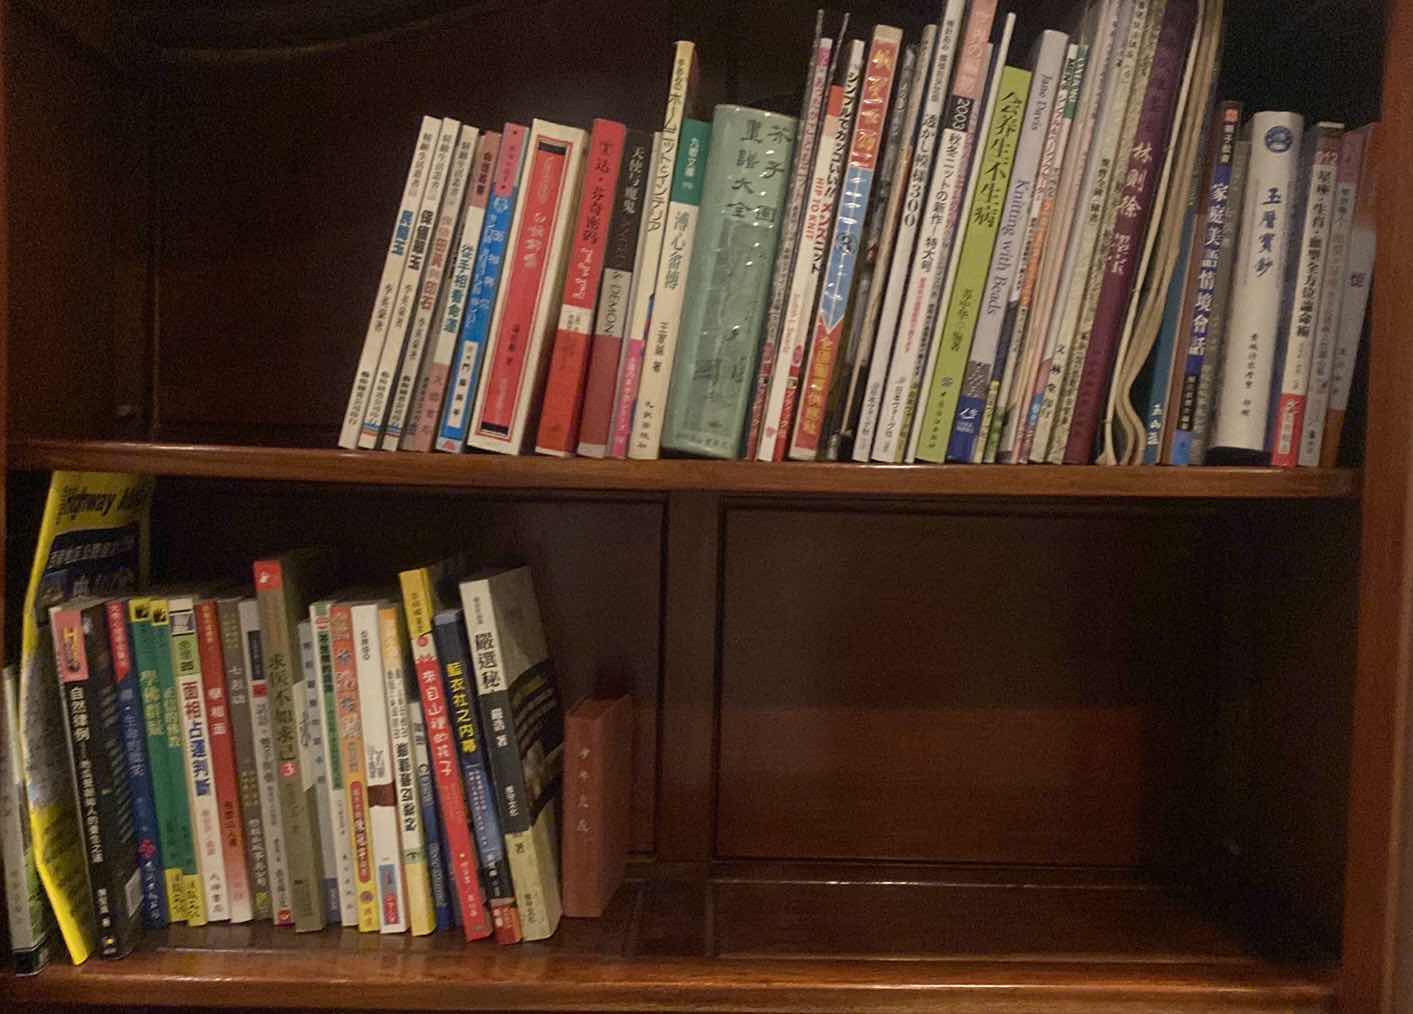 Photo 1 of 2 SHELVES OF CHINESE BOOKS IN DESK OF MASTER BEDROOM